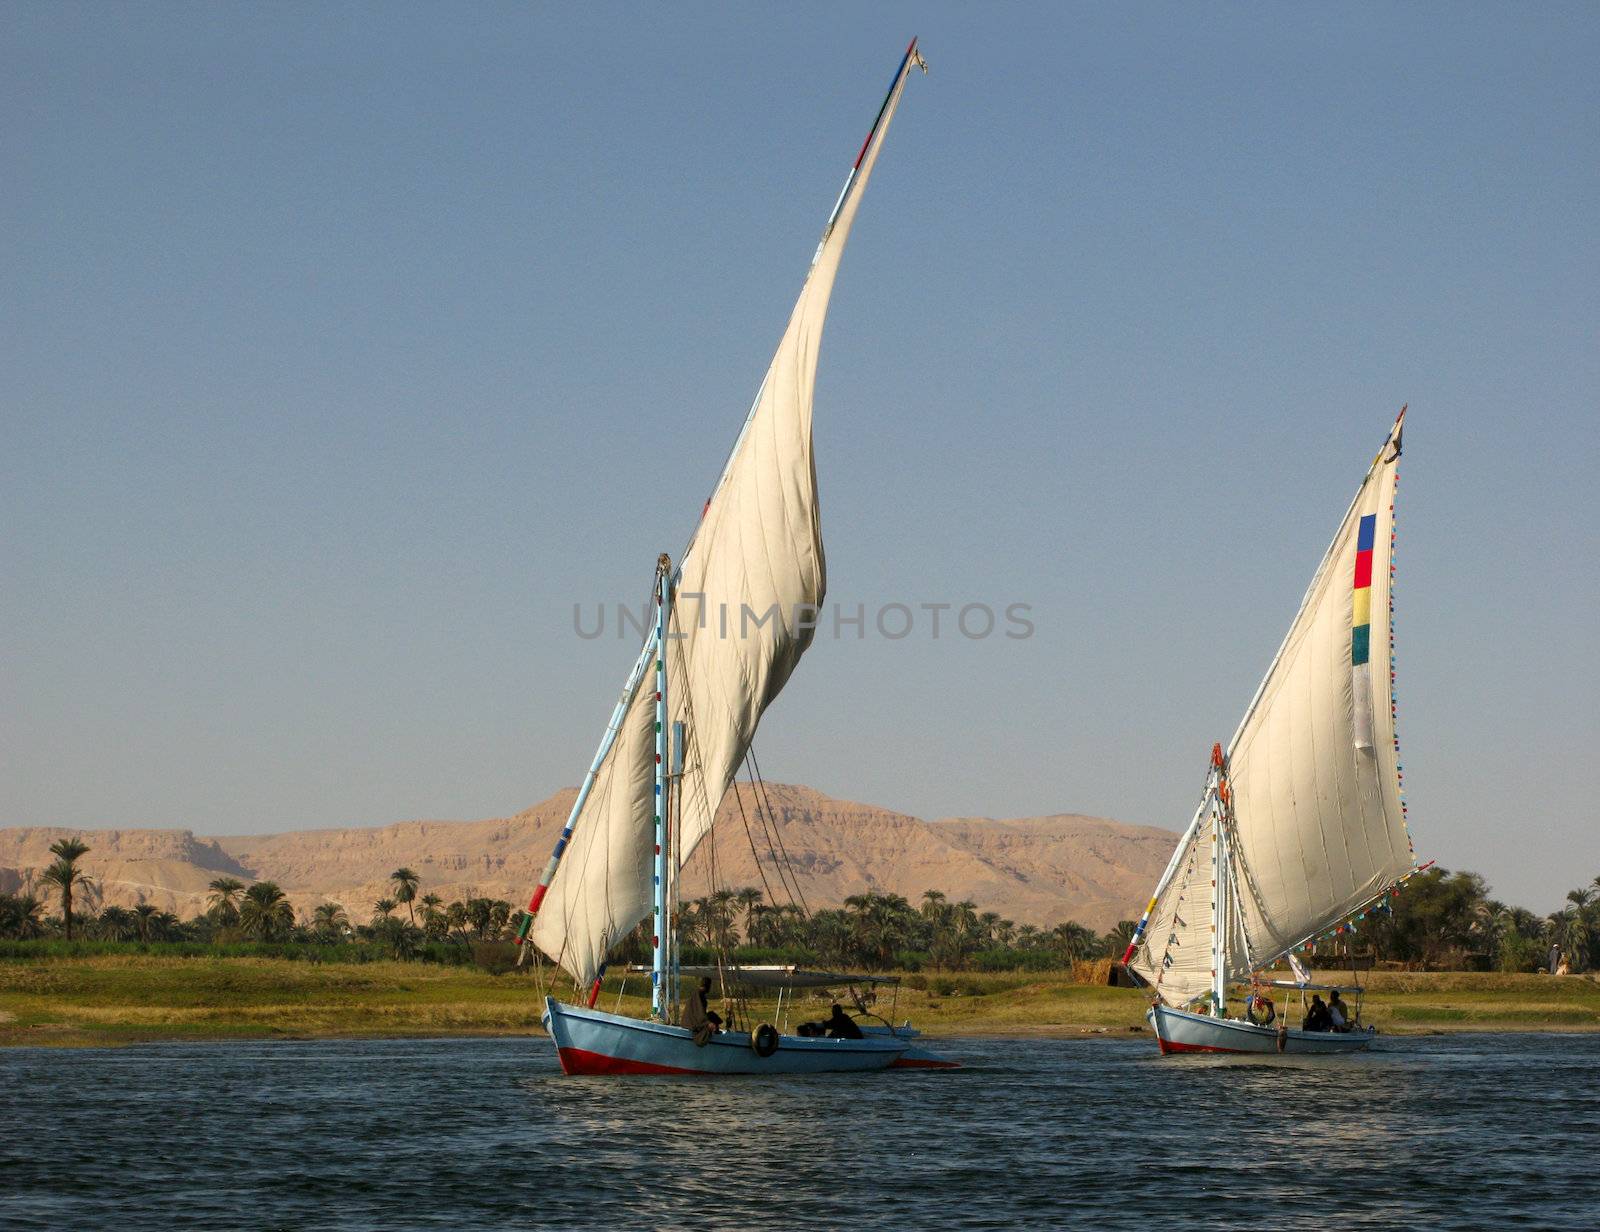 Two boats fishing on Nile, Egypt